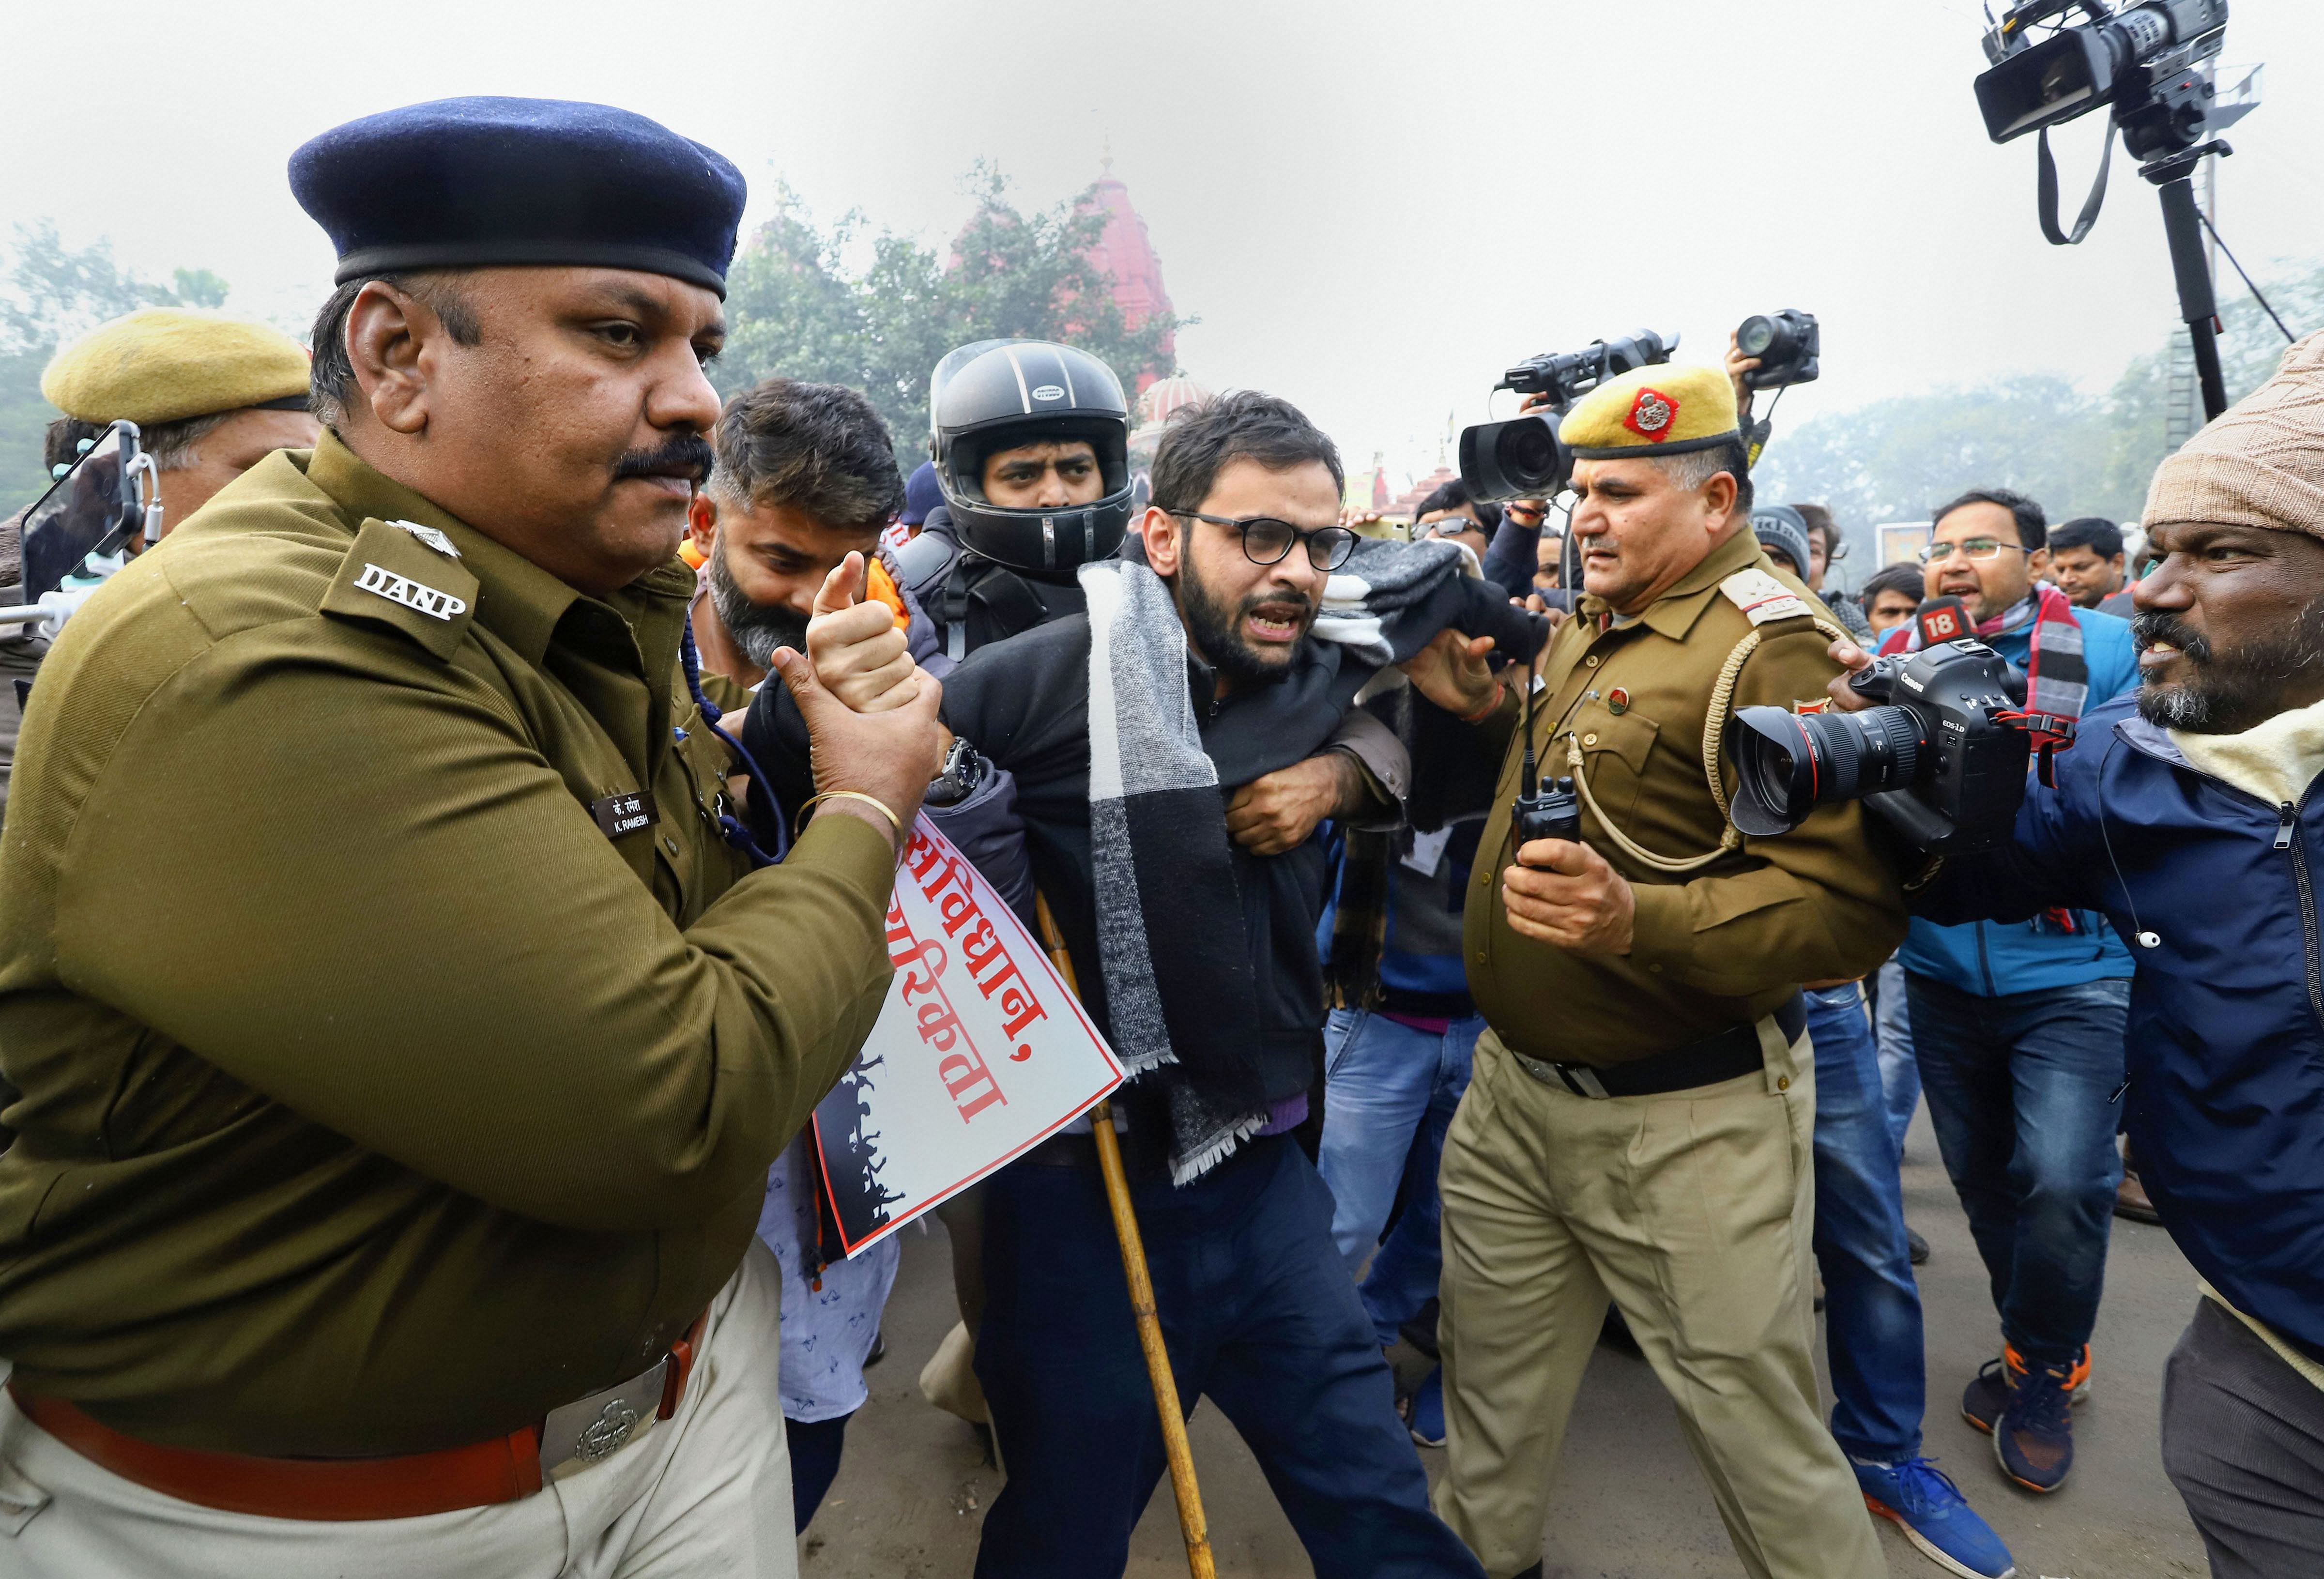 Former JNU student and activist Umar Khalid is detained by police for defying prohibitory orders imposed by the Delhi Police in the area during an anti-Citizenship Act protest, at Red Fort, in New Delhi. (PTI Photo)